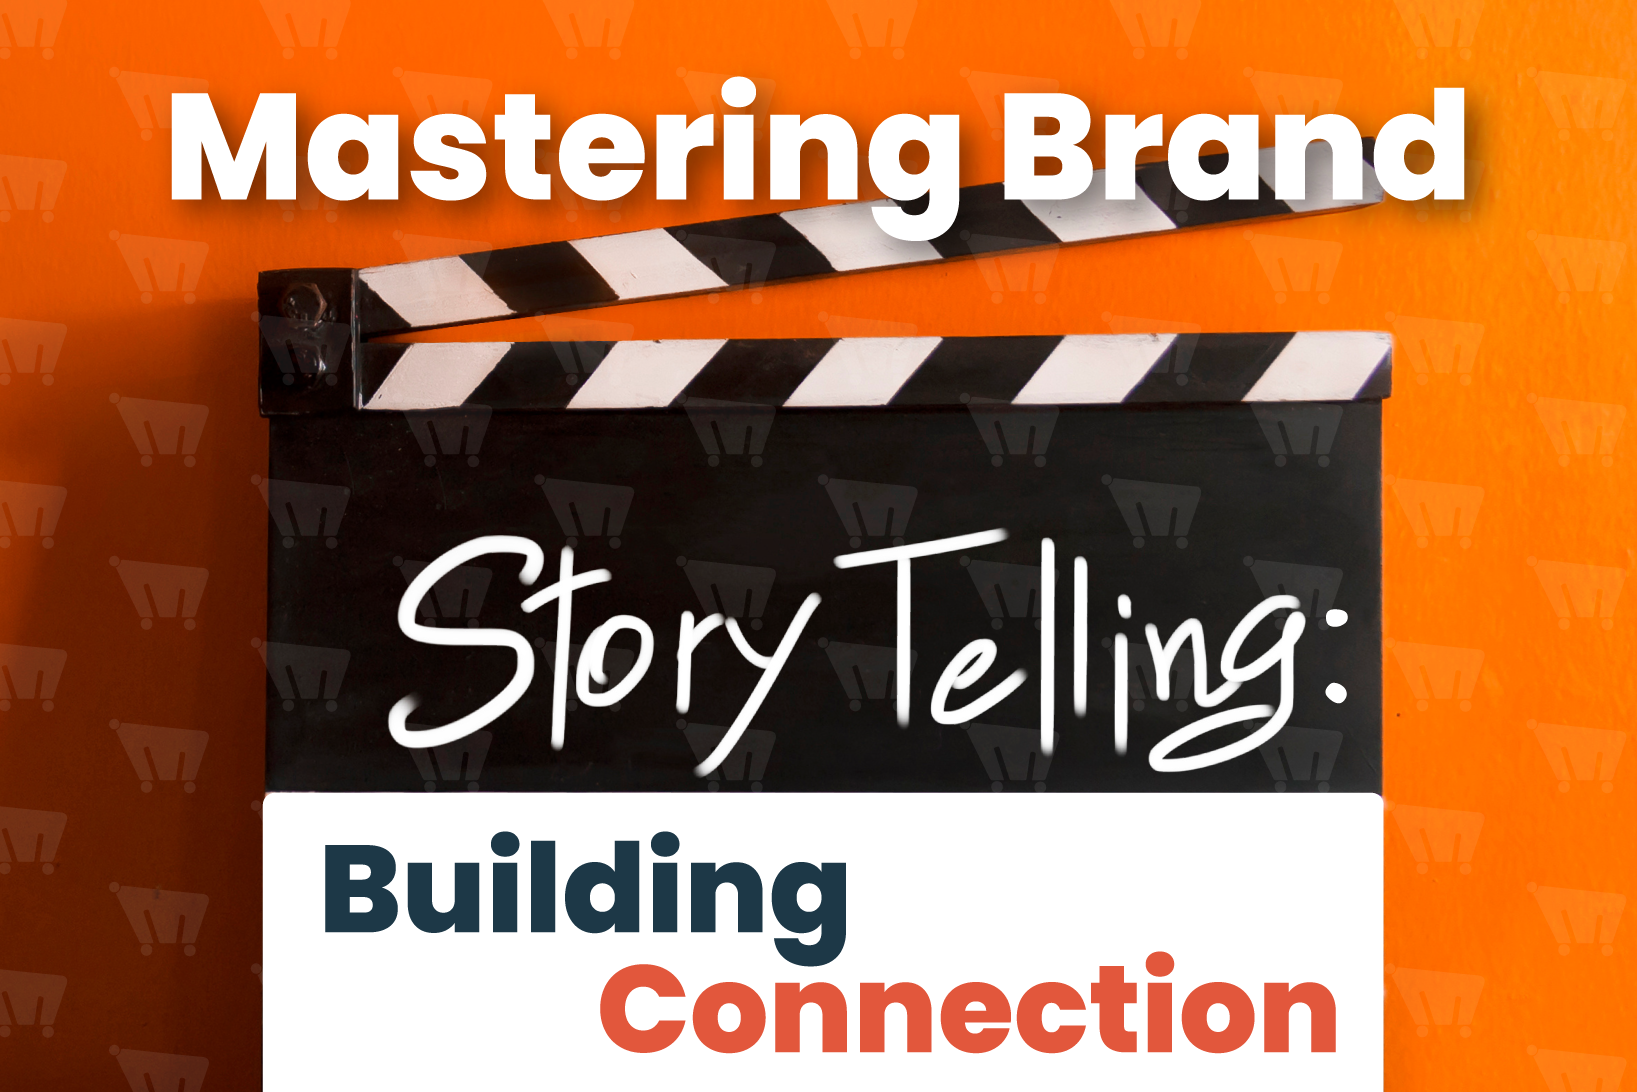 Mastering Brand Storytelling: Building Connection